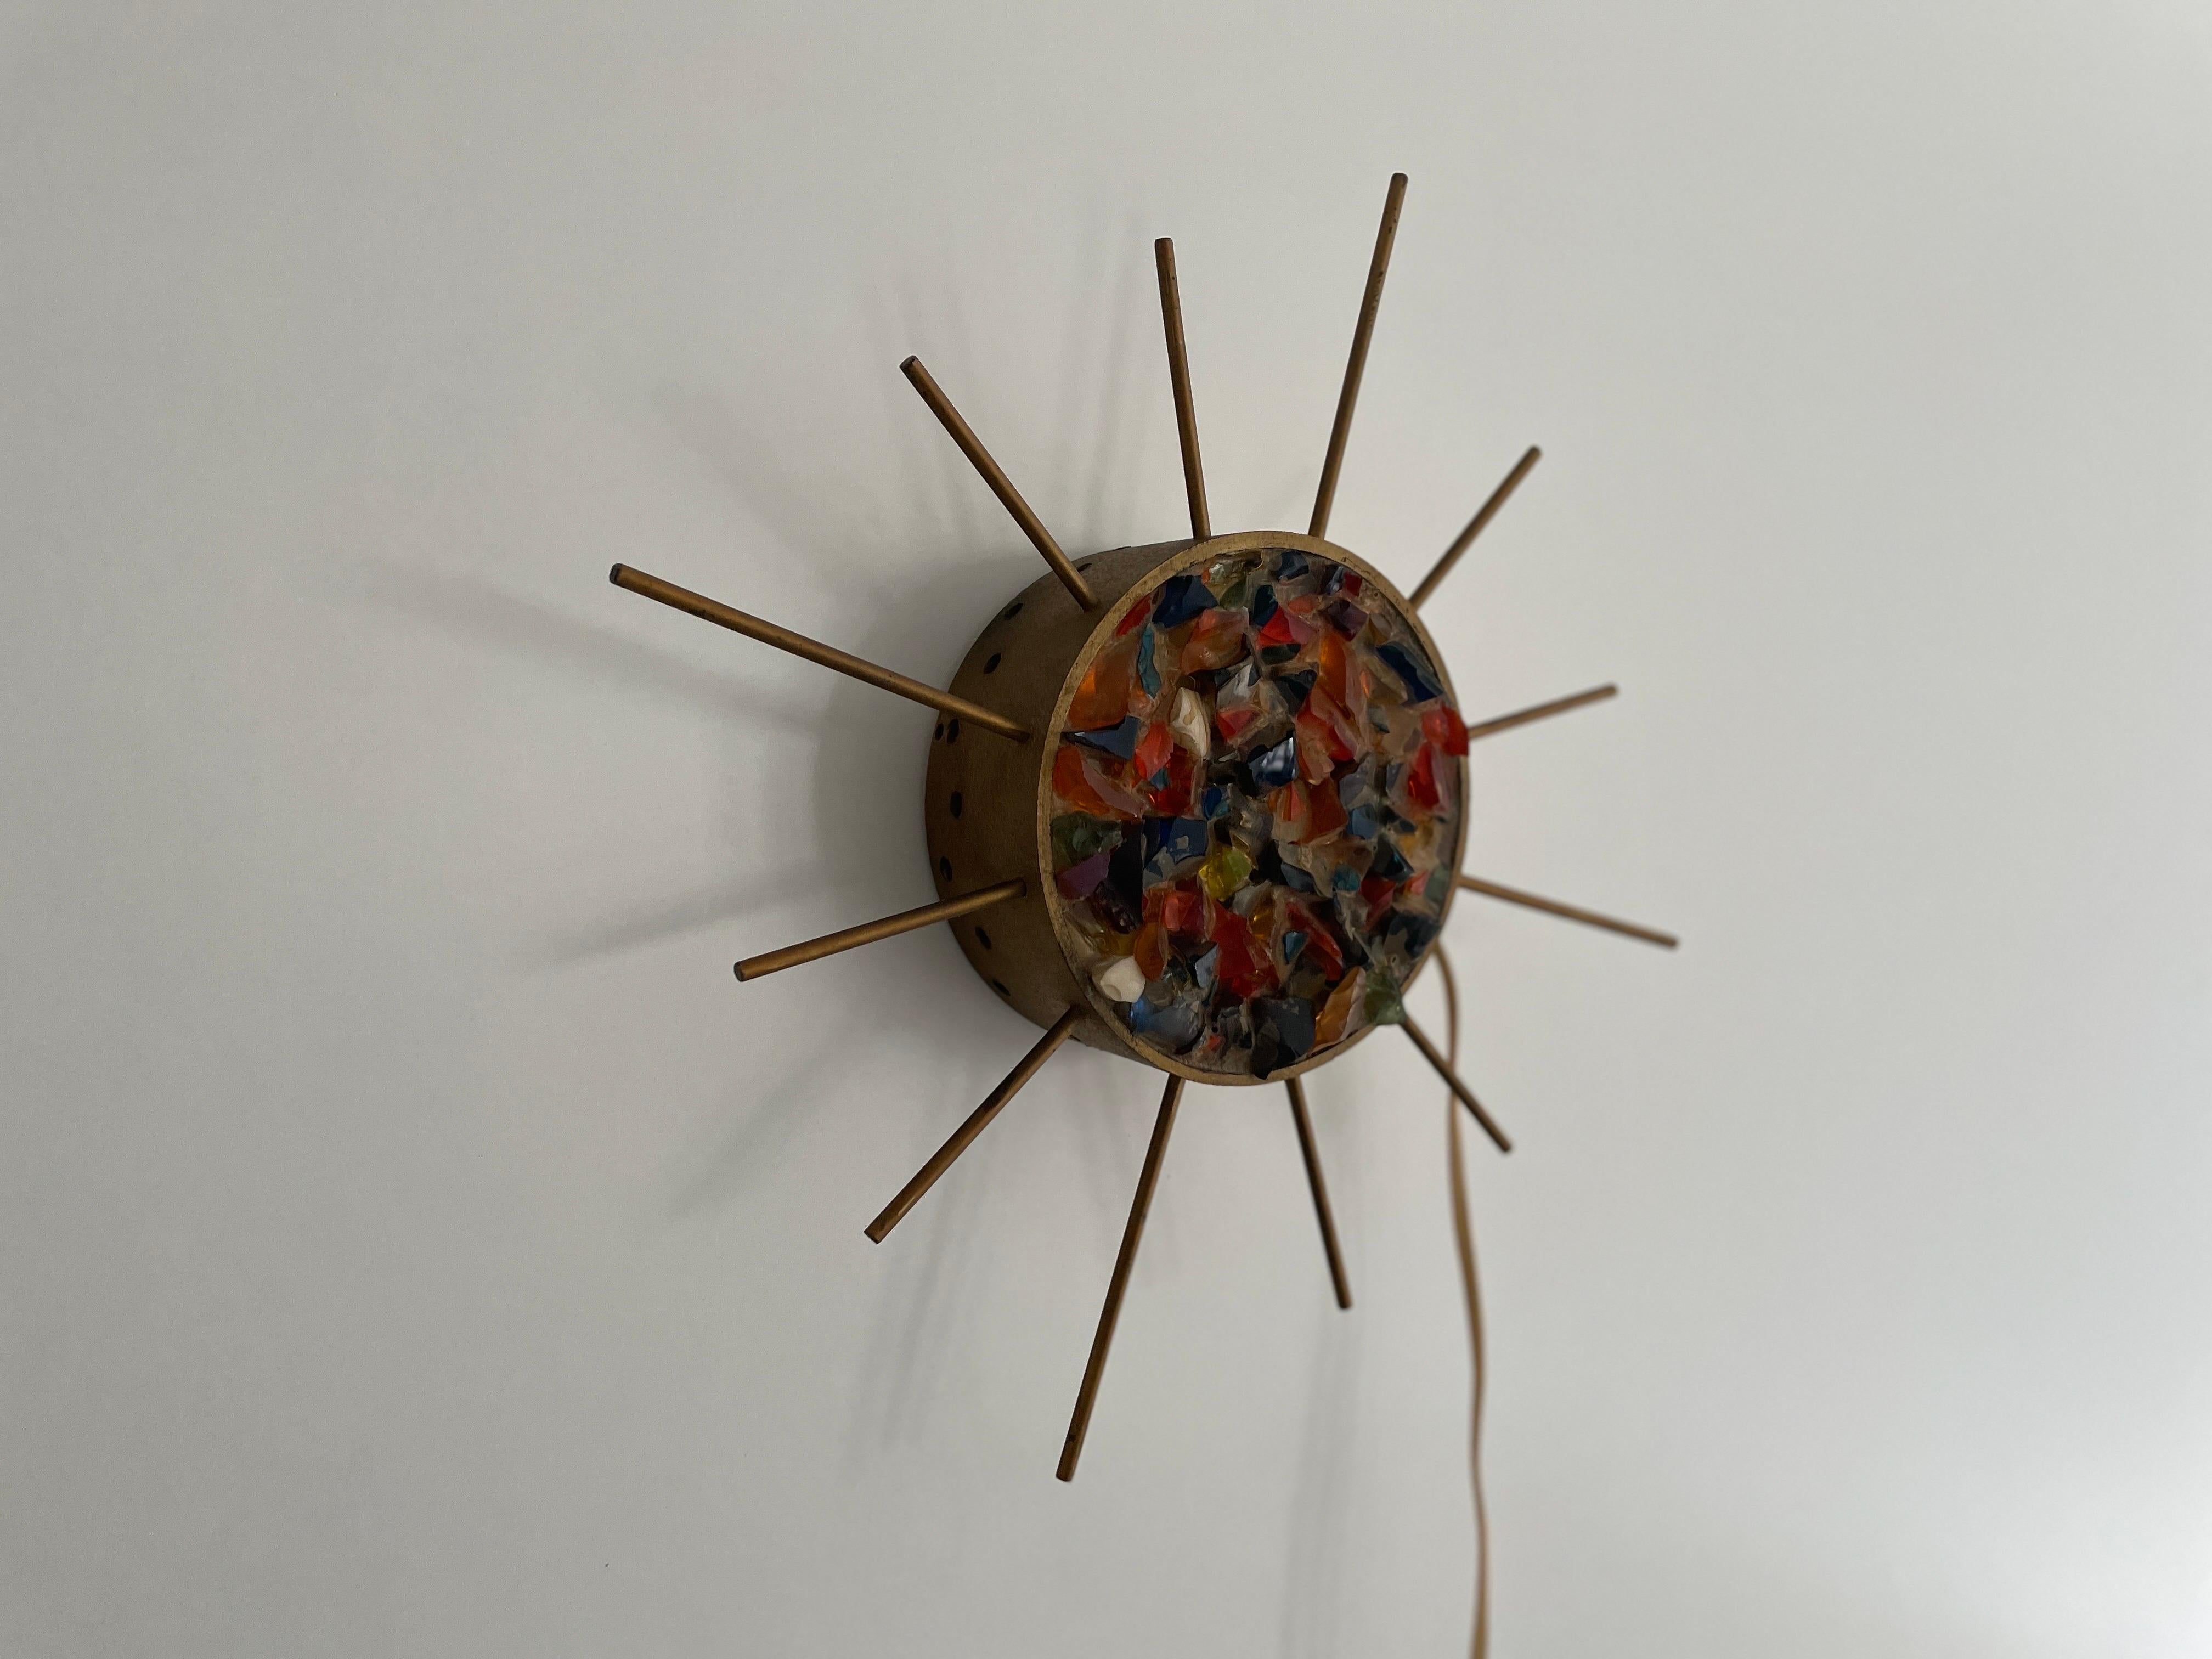 Sunburst Design Colorful Pieces Glass in Stone Form Wall Lamp, 1960s, Germany

Very elegant and Minimalist wall lamp, it can be use as a table lamp

Lamps is in very good condition.

These lamps works with E14 standard light bulbs. Each lamp works